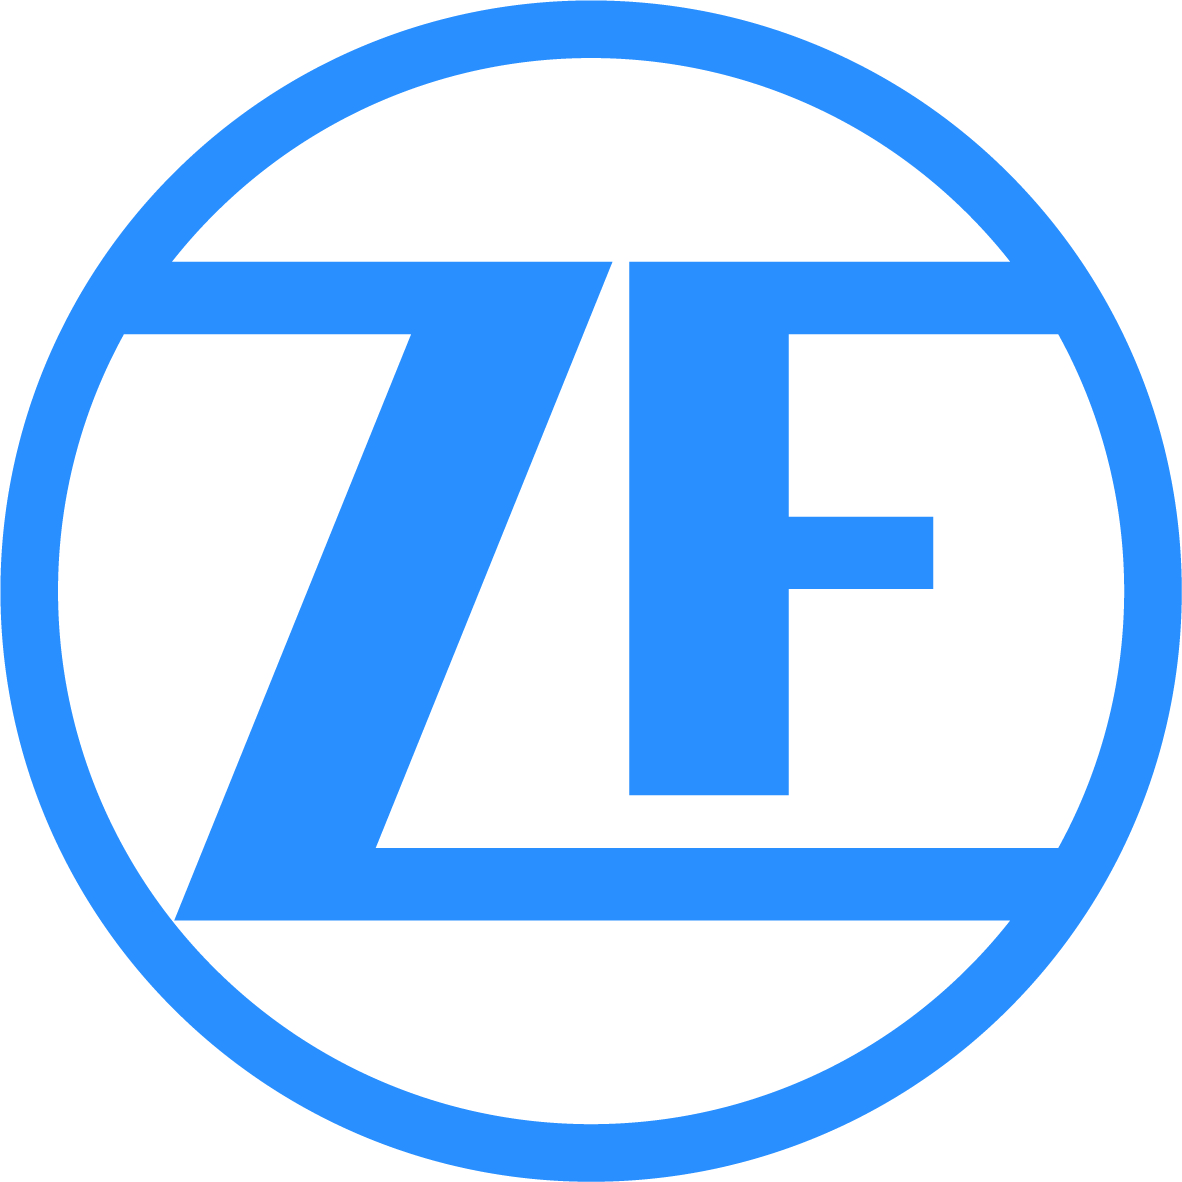 ZF Complete Rebranding of Cherry Switches